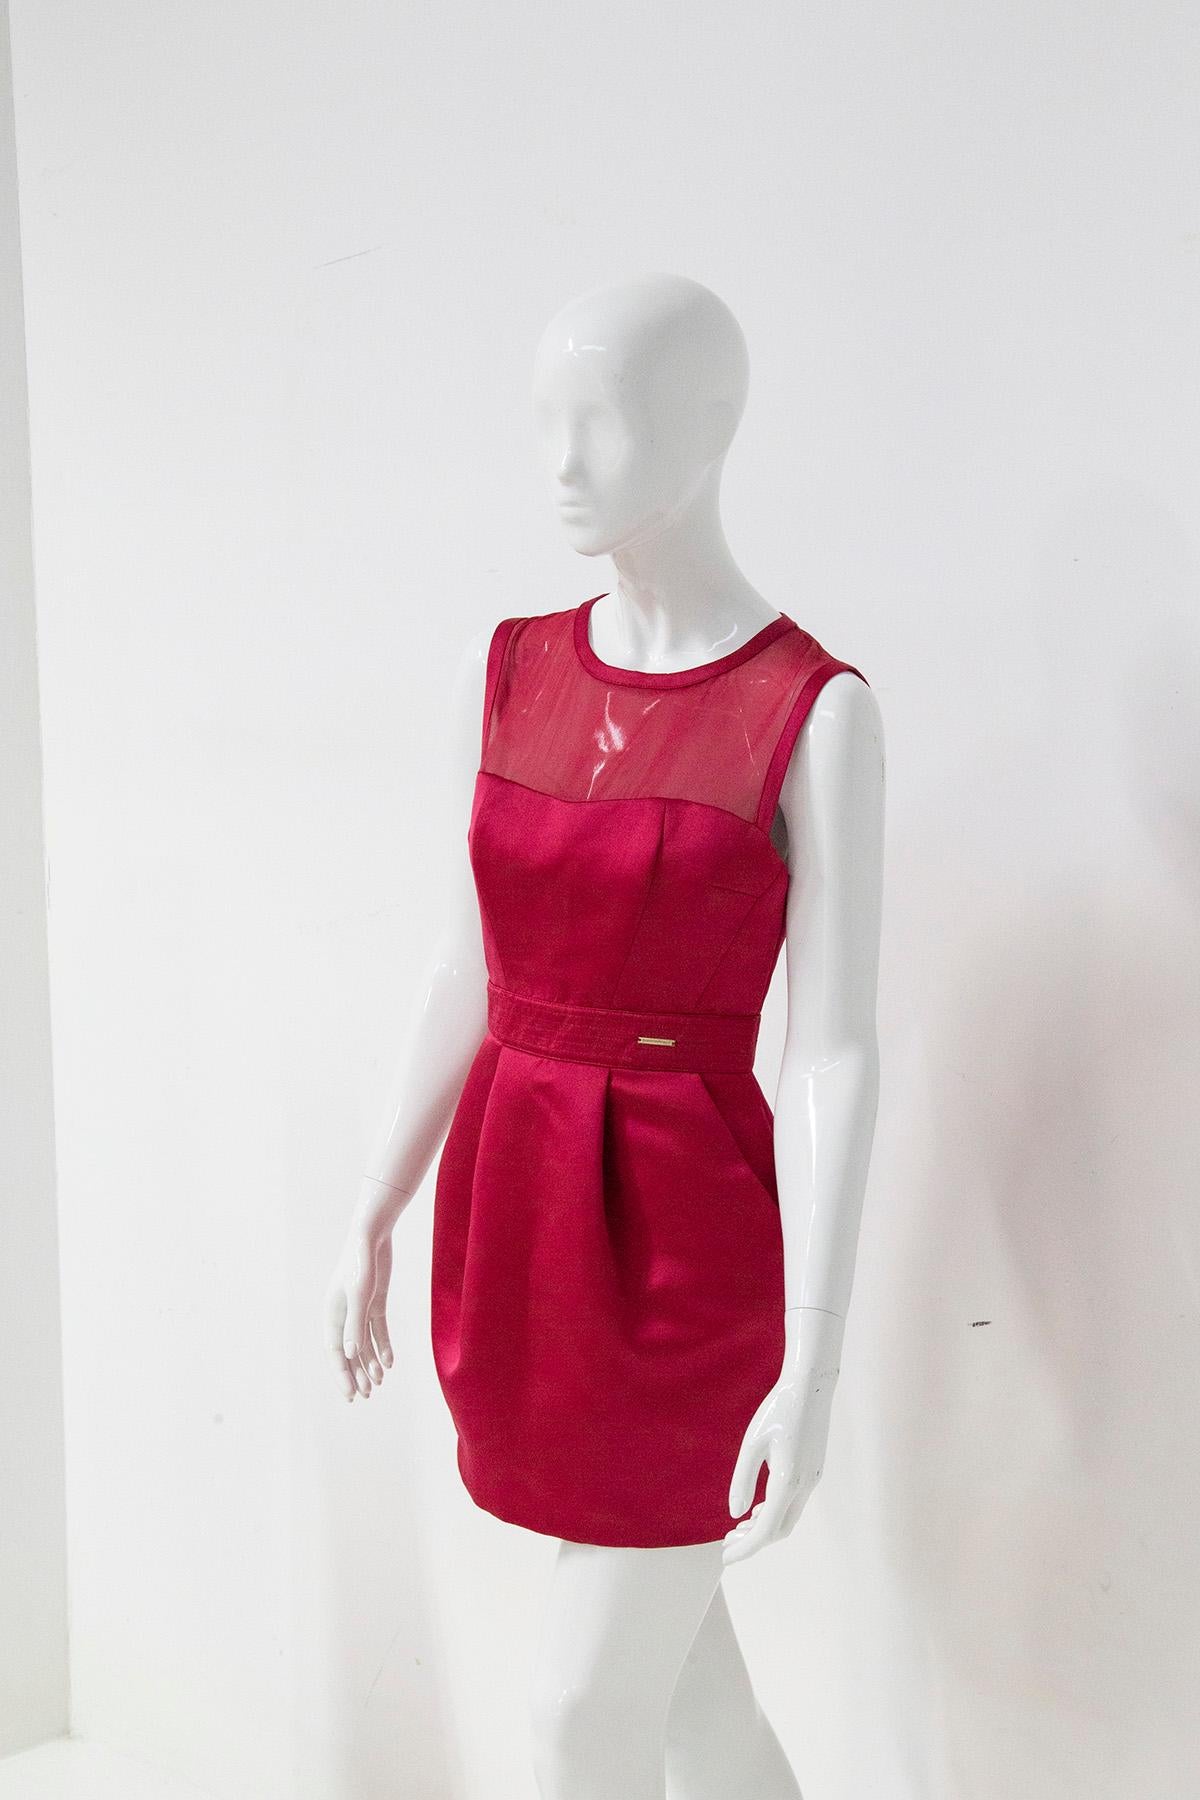 Elisabetta Franchi fuchsia cocktail dress In Excellent Condition For Sale In Milano, IT